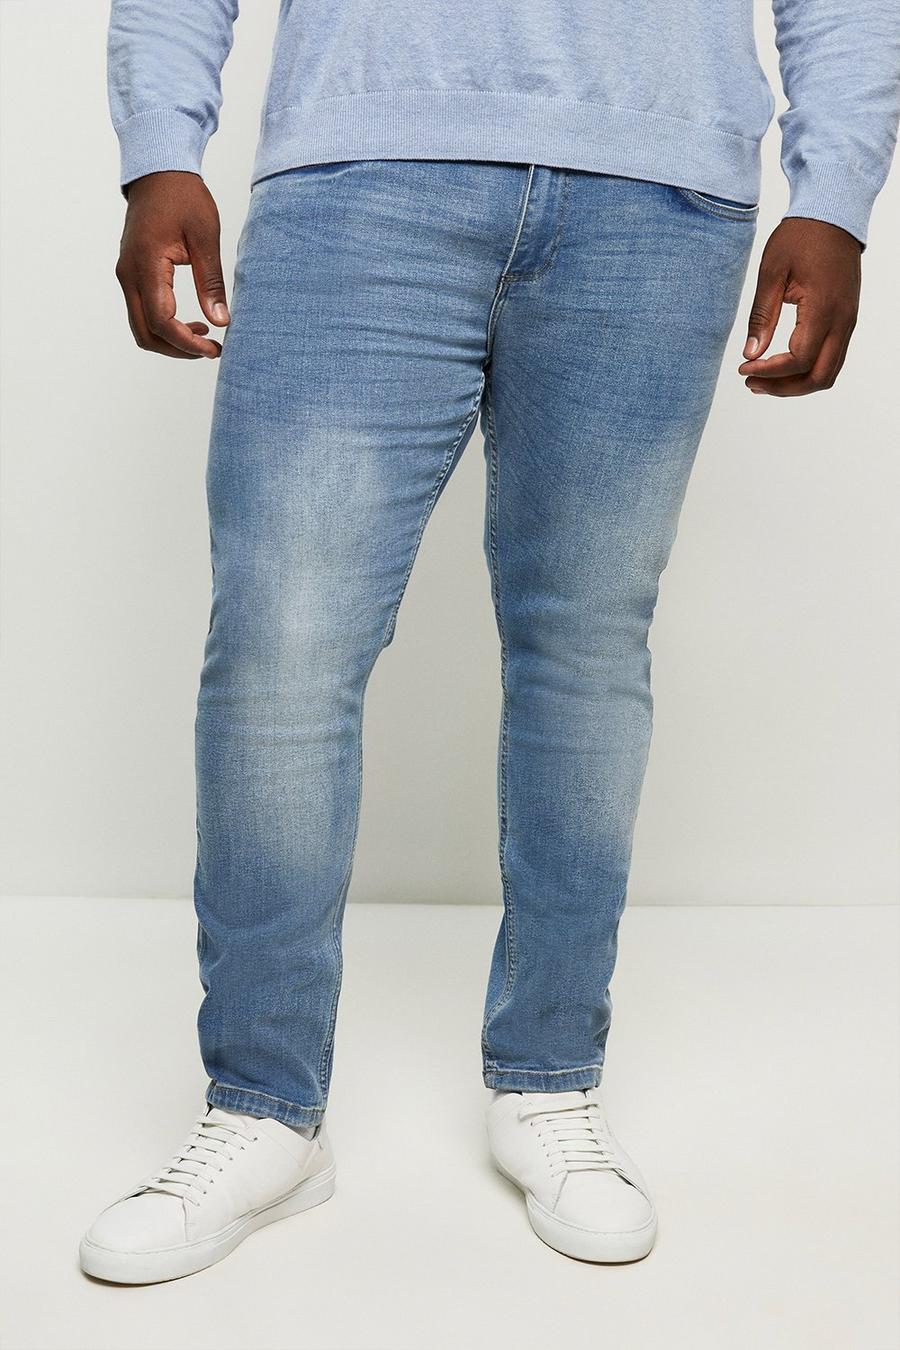 Plus And Tall Skinny Light Blue Jeans